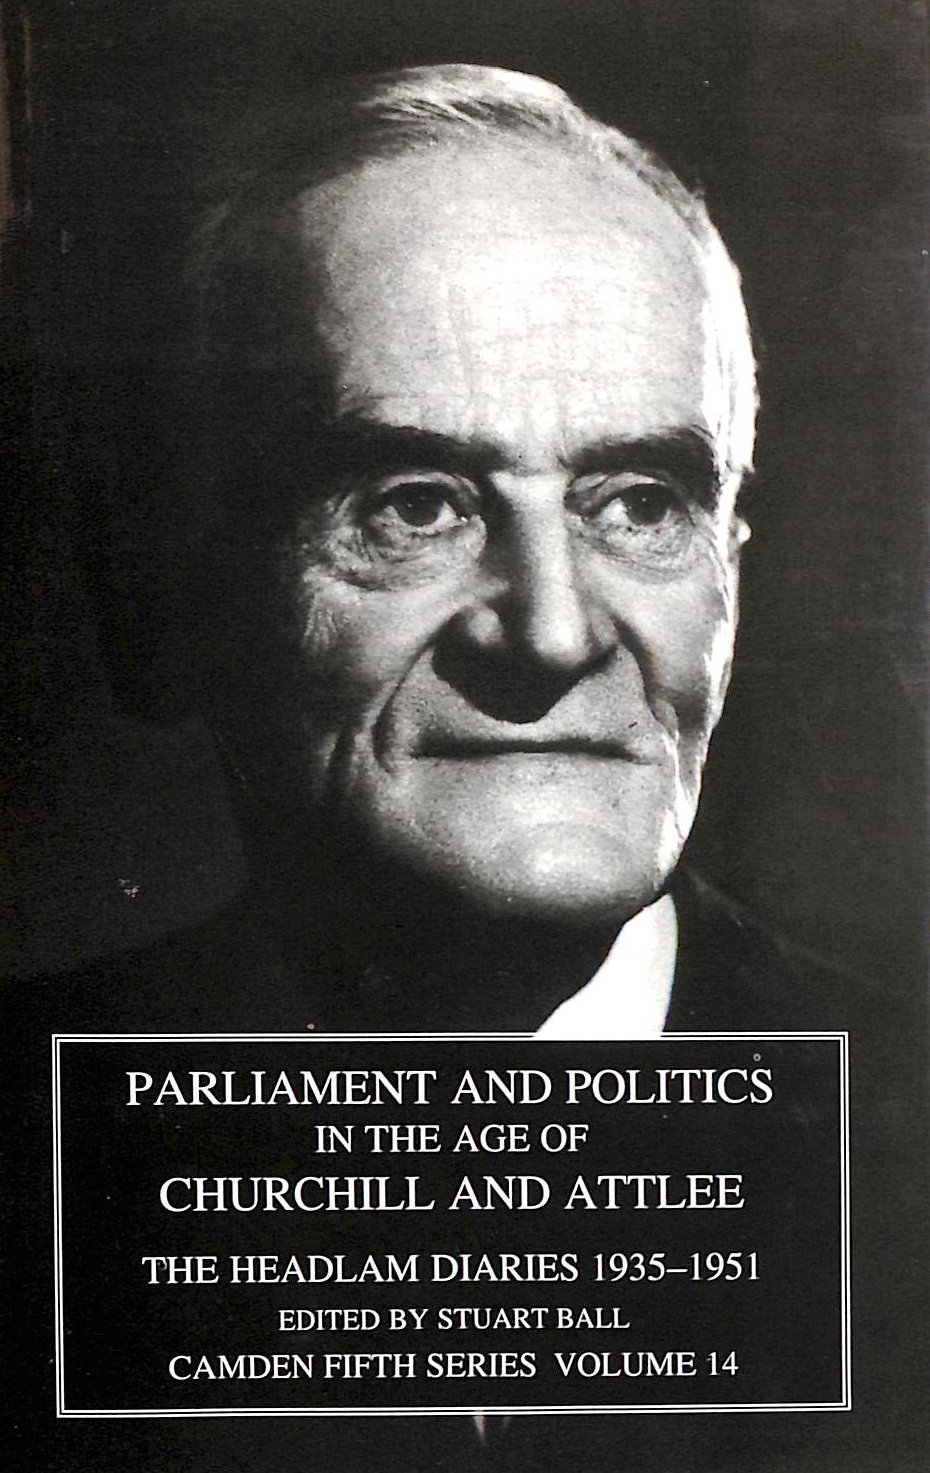 CUTHBERT HEADLAM; STUART BALL [EDITOR] - Parliament and Politics in the Age of Churchill and Attlee: The Headlam Diaries 1935-1951: 14